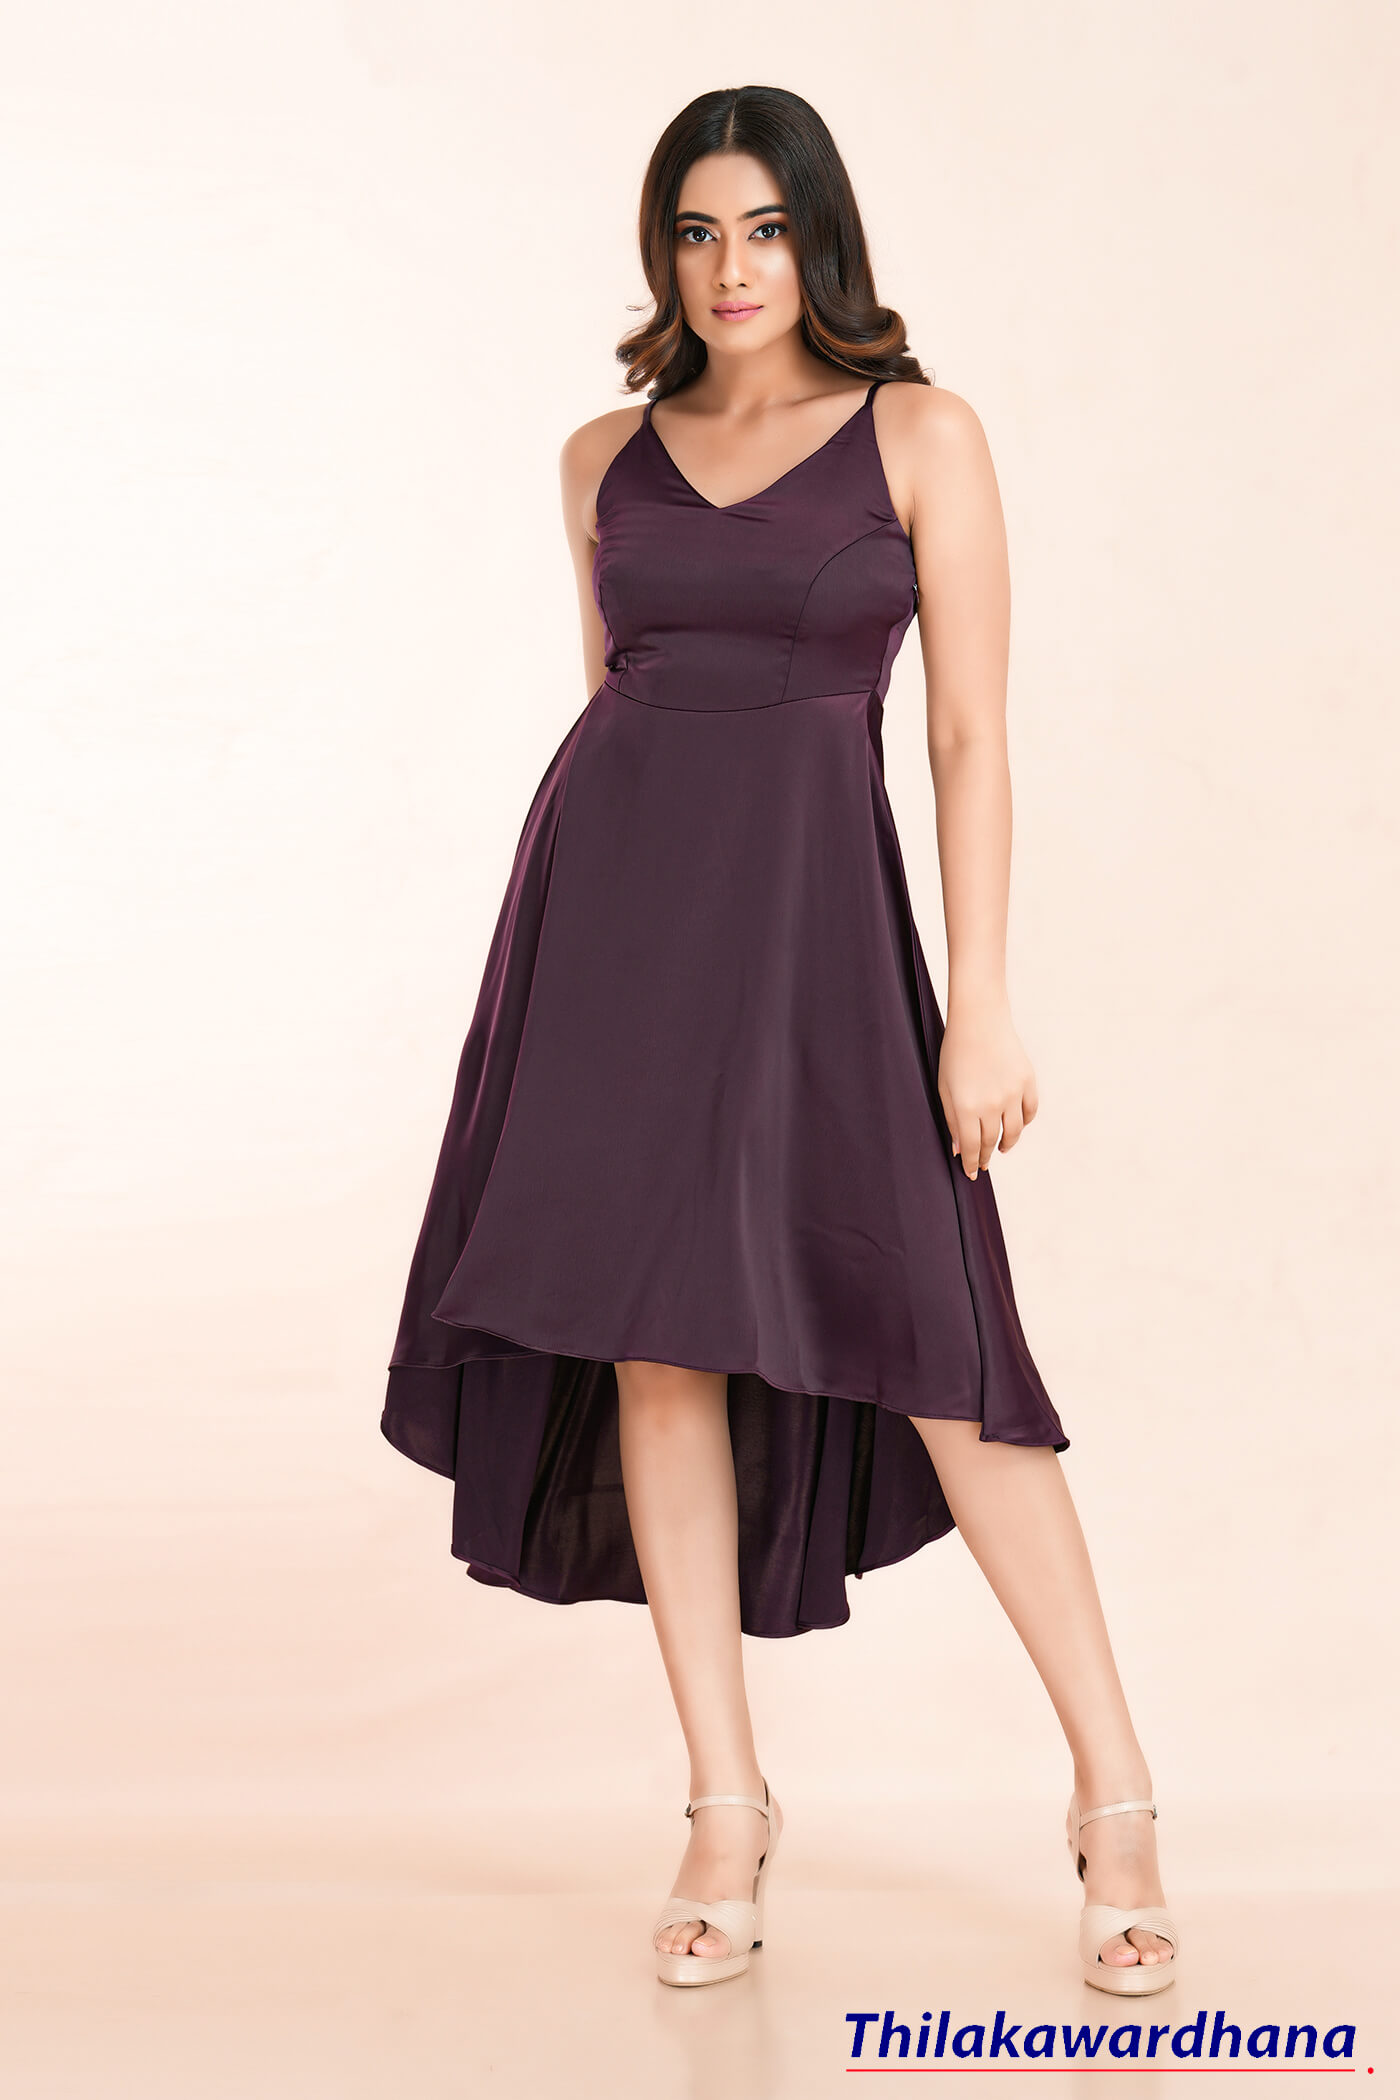 Bridesmaid Dresses Starting From $99| Page 2 | Birdy Grey